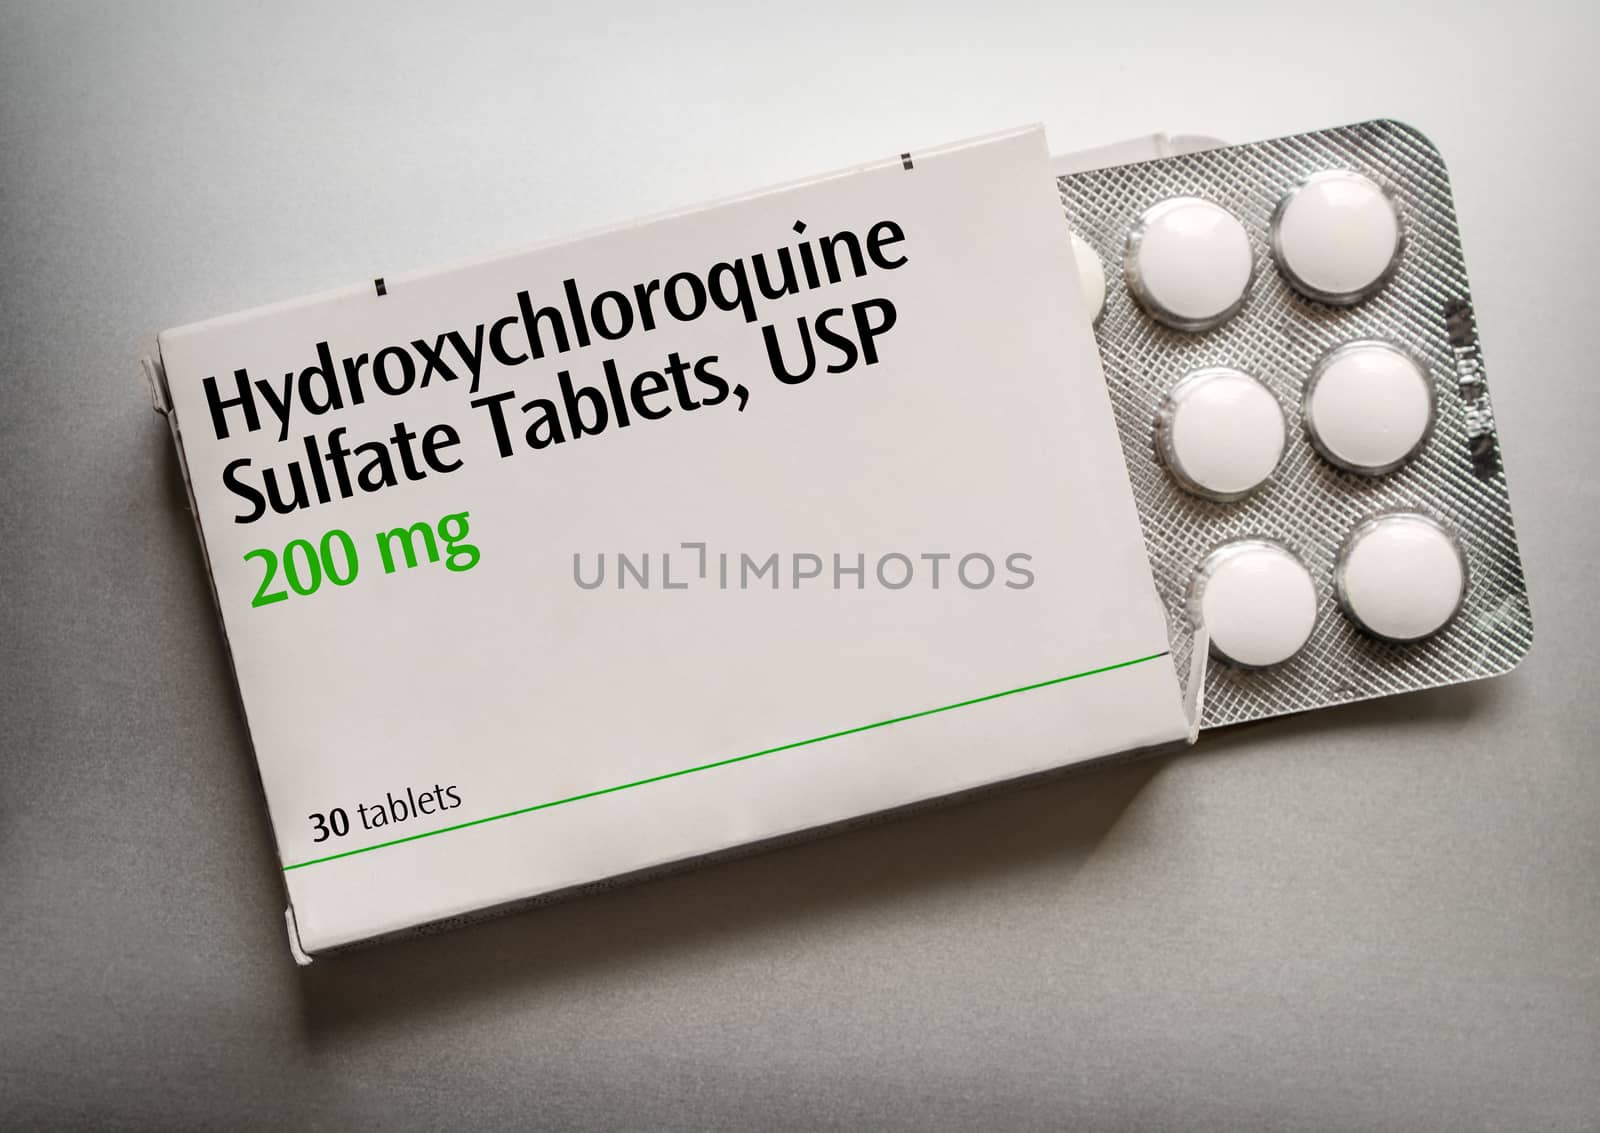 Box of Hydroxychloroquine Tablets (artistic rendering)